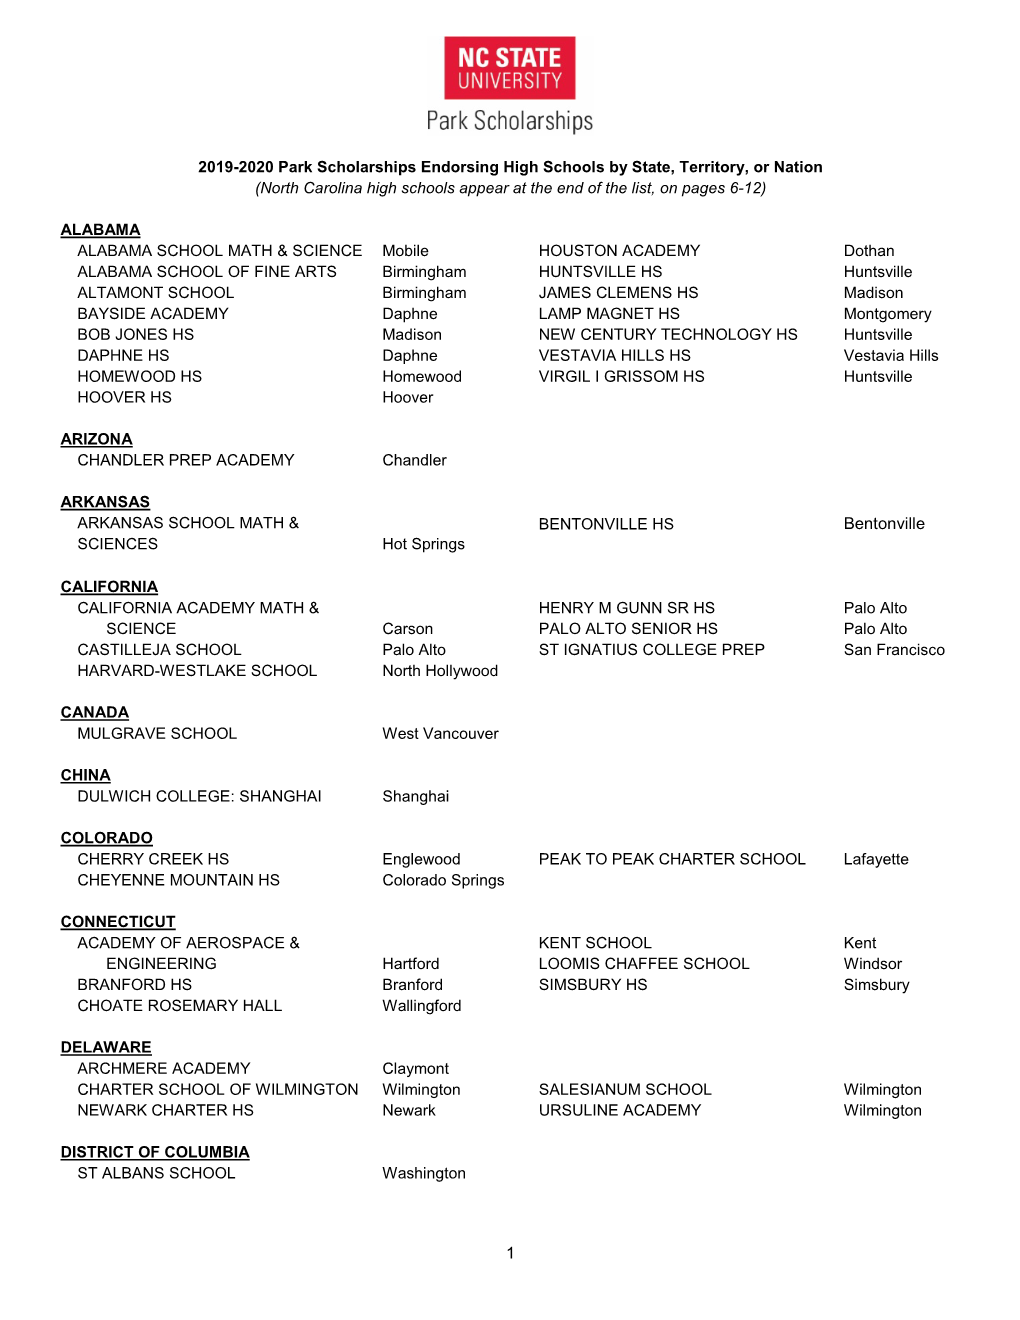 1 2019-2020 Park Scholarships Endorsing High Schools by State, Territory, Or Nation (North Carolina High Schools Appear at the E